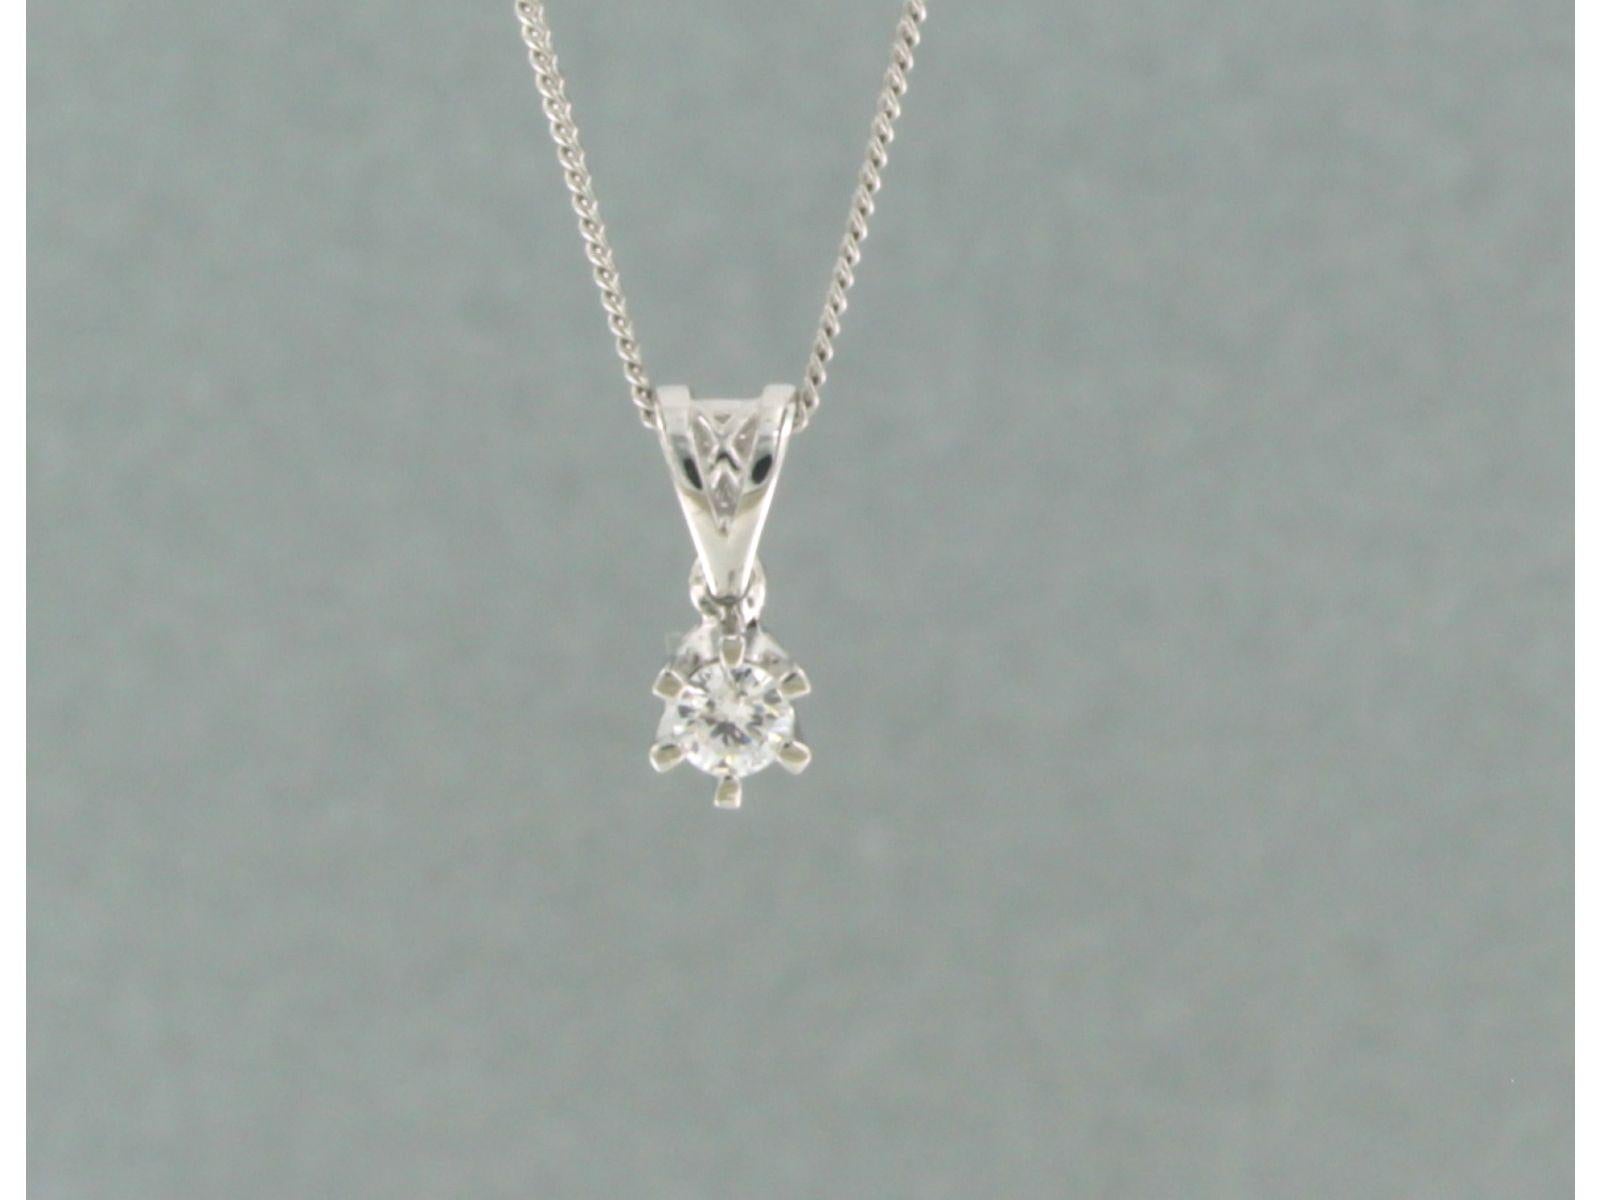 Necklace and solitair pendant set with brilliant cut diamonds 14k white gold For Sale 1